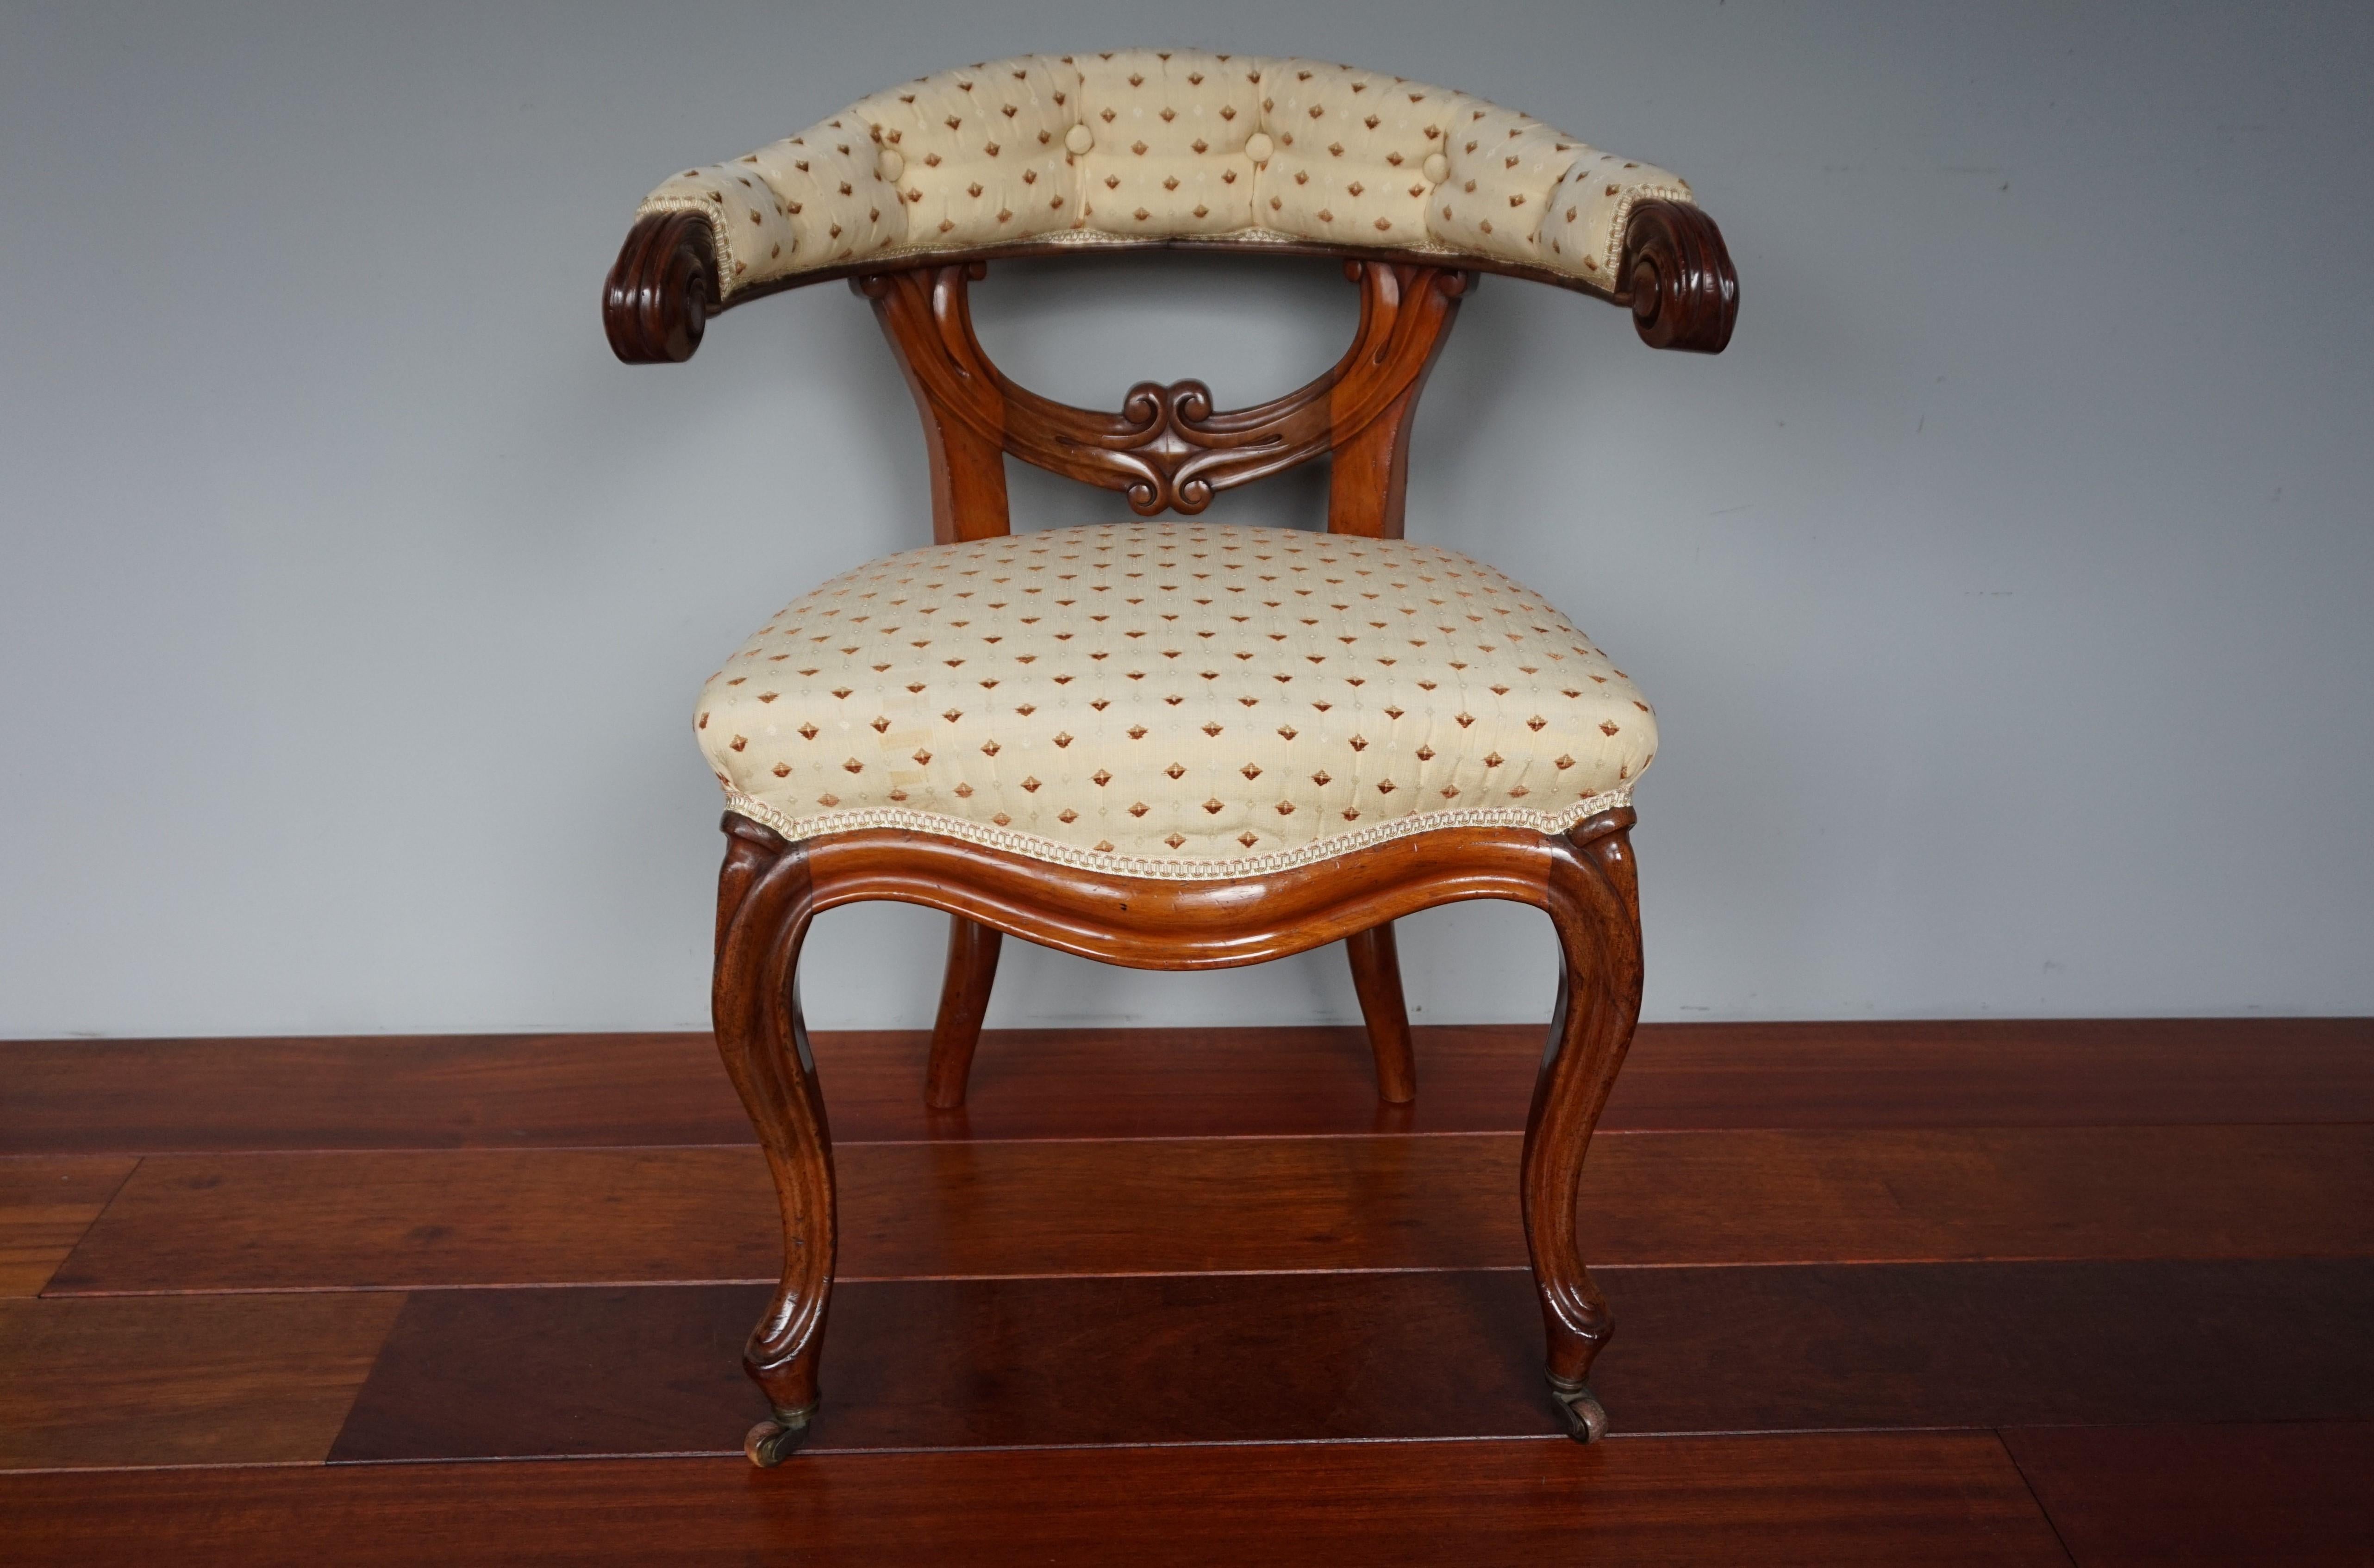 Exceptional design and highly stylish antique office chair.

This remarkable antique chair from the mid-1800s is as strong and stable as the day she was handcrafted over 150 years ago. Antique office chairs come in all shapes and sizes, but this